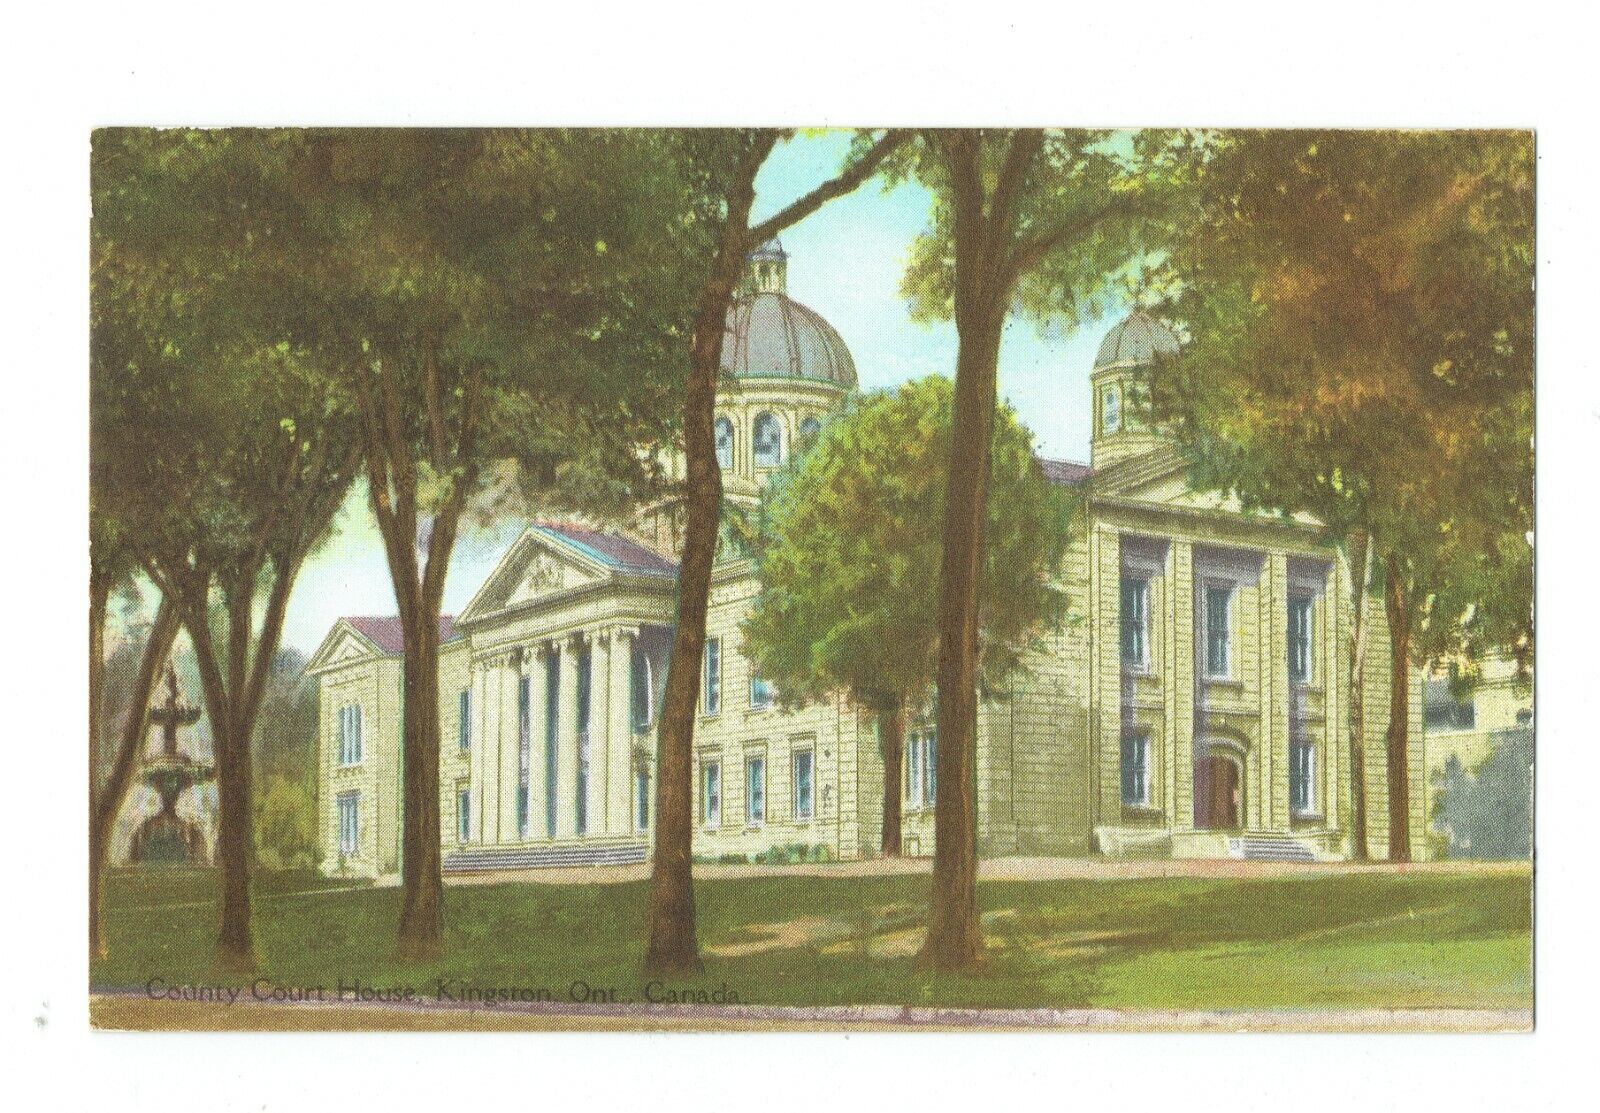 Postcards Vintage (1) Kingston, Ont, Canada County Court House 235-2 UP (378)